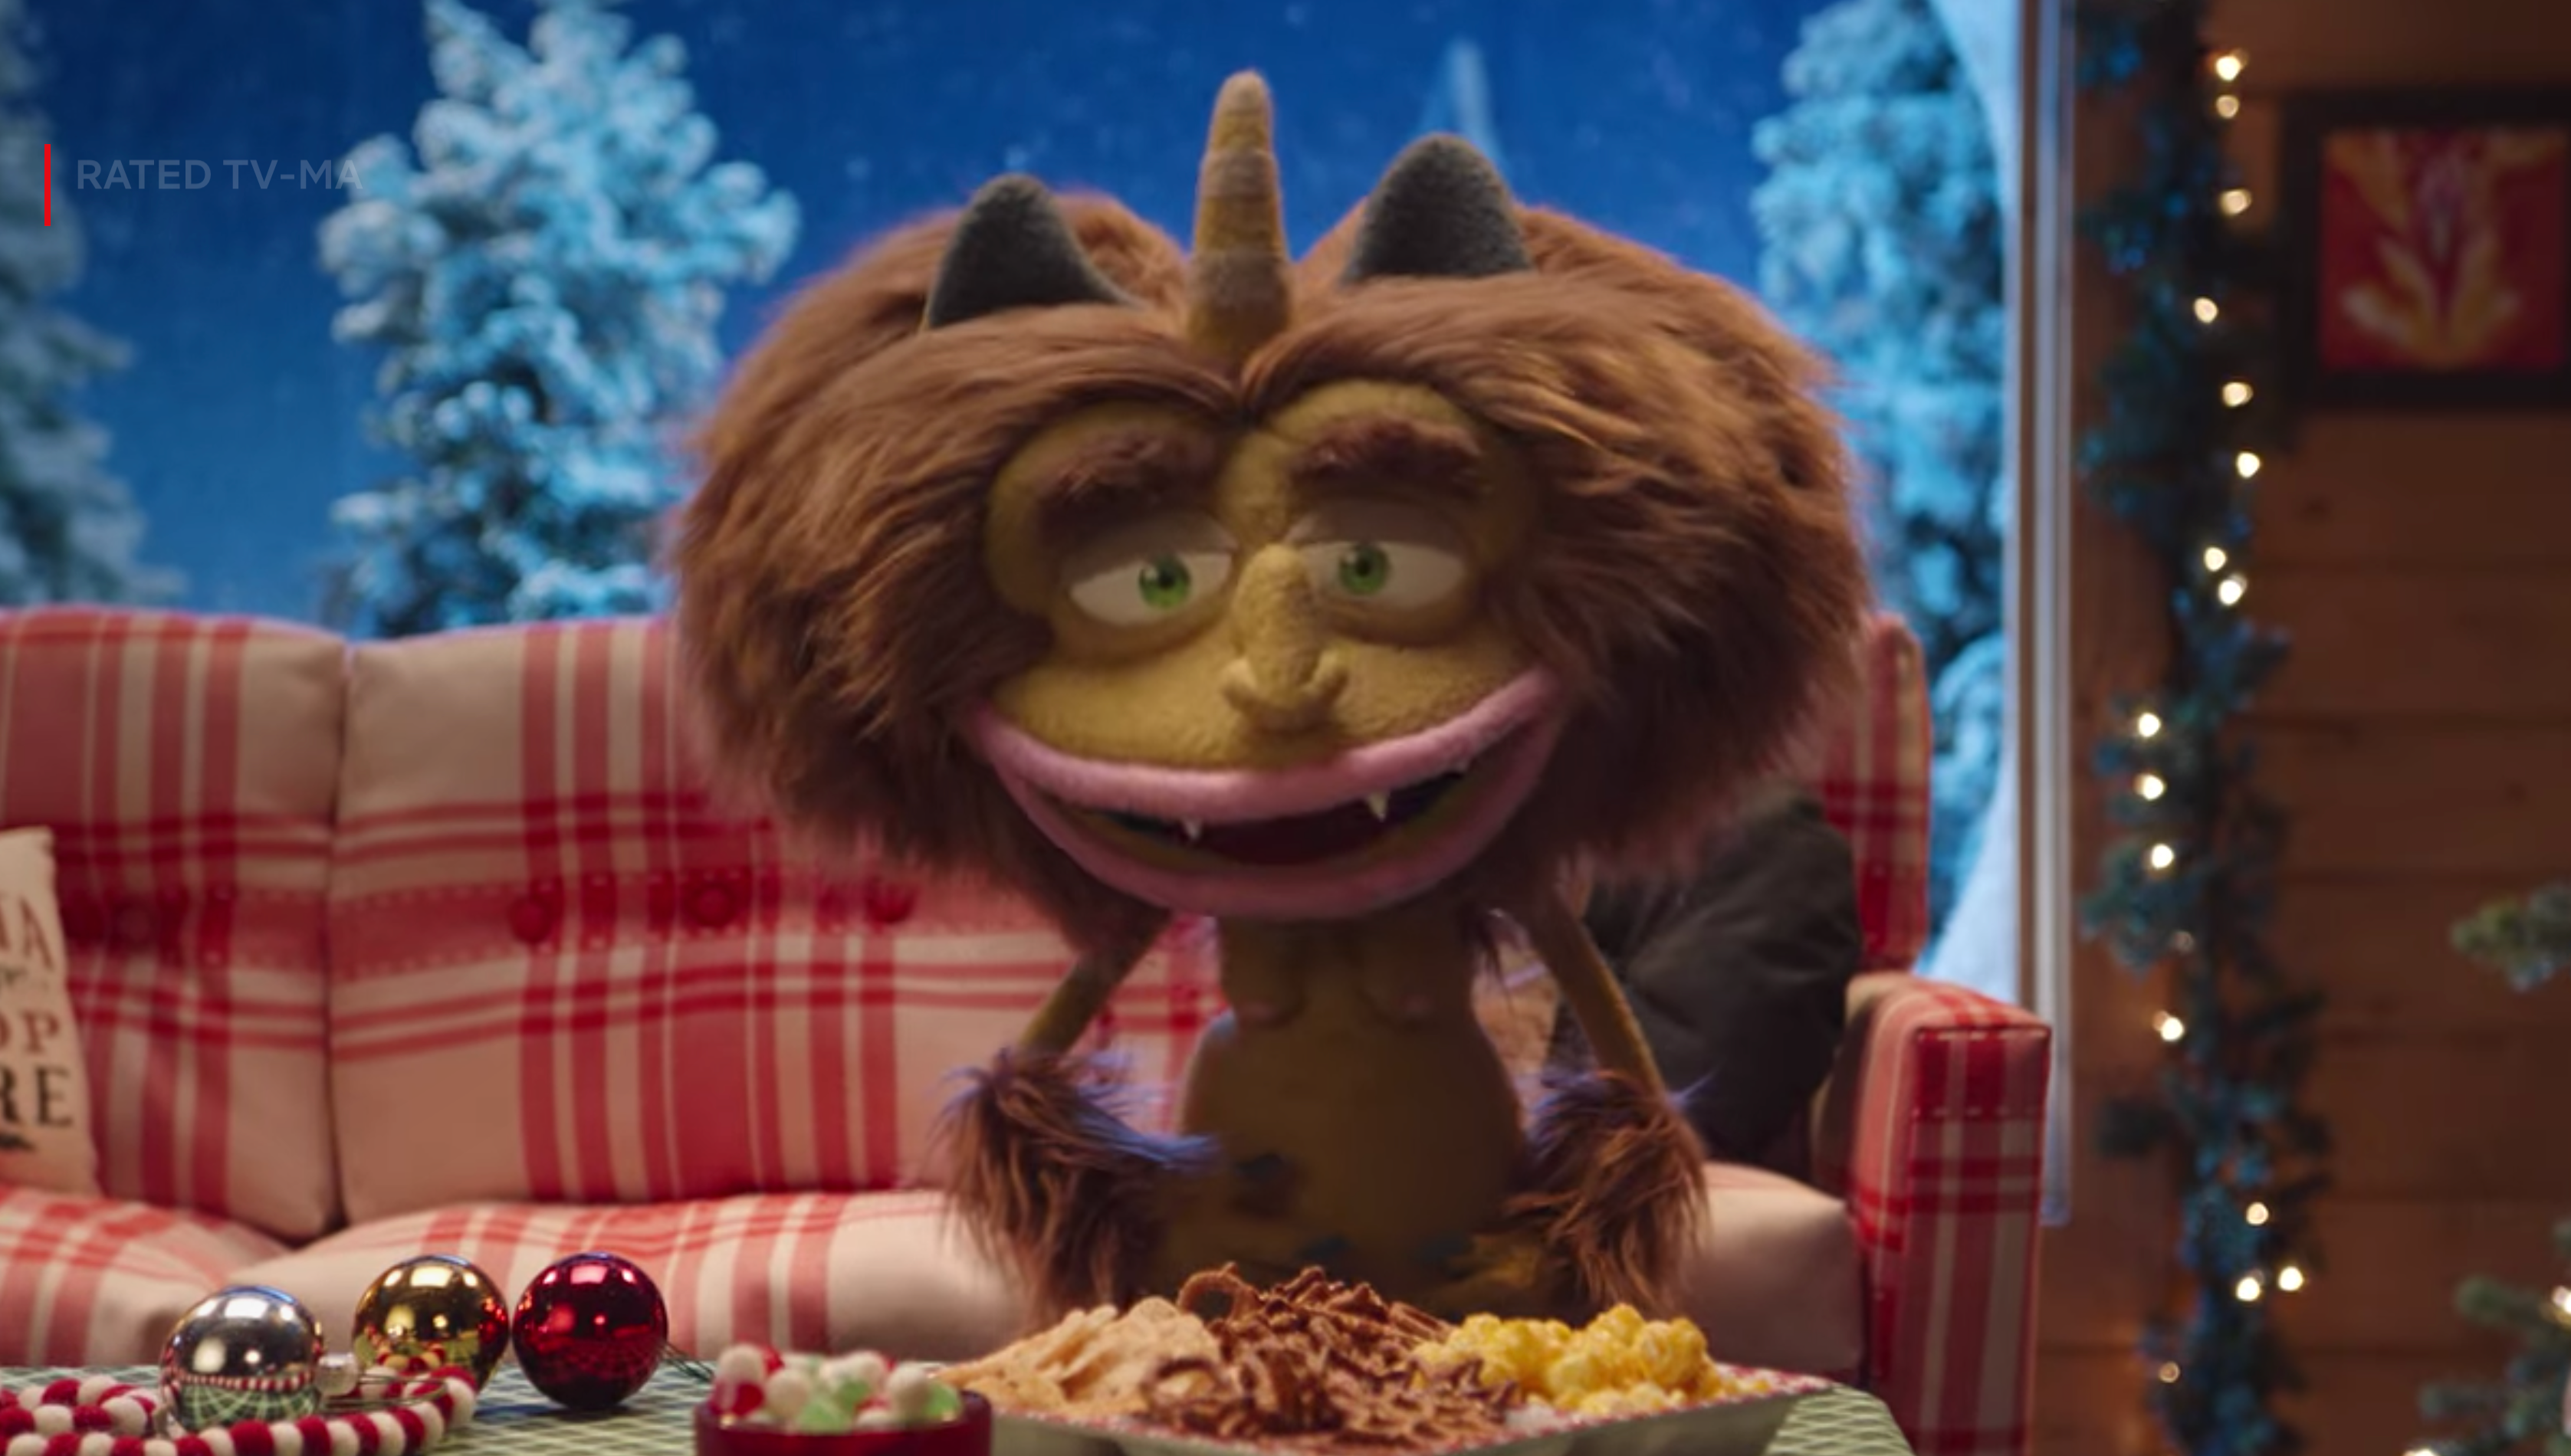 Let Big Mouth‘s monsters wish you happy holidays with this exclusive short